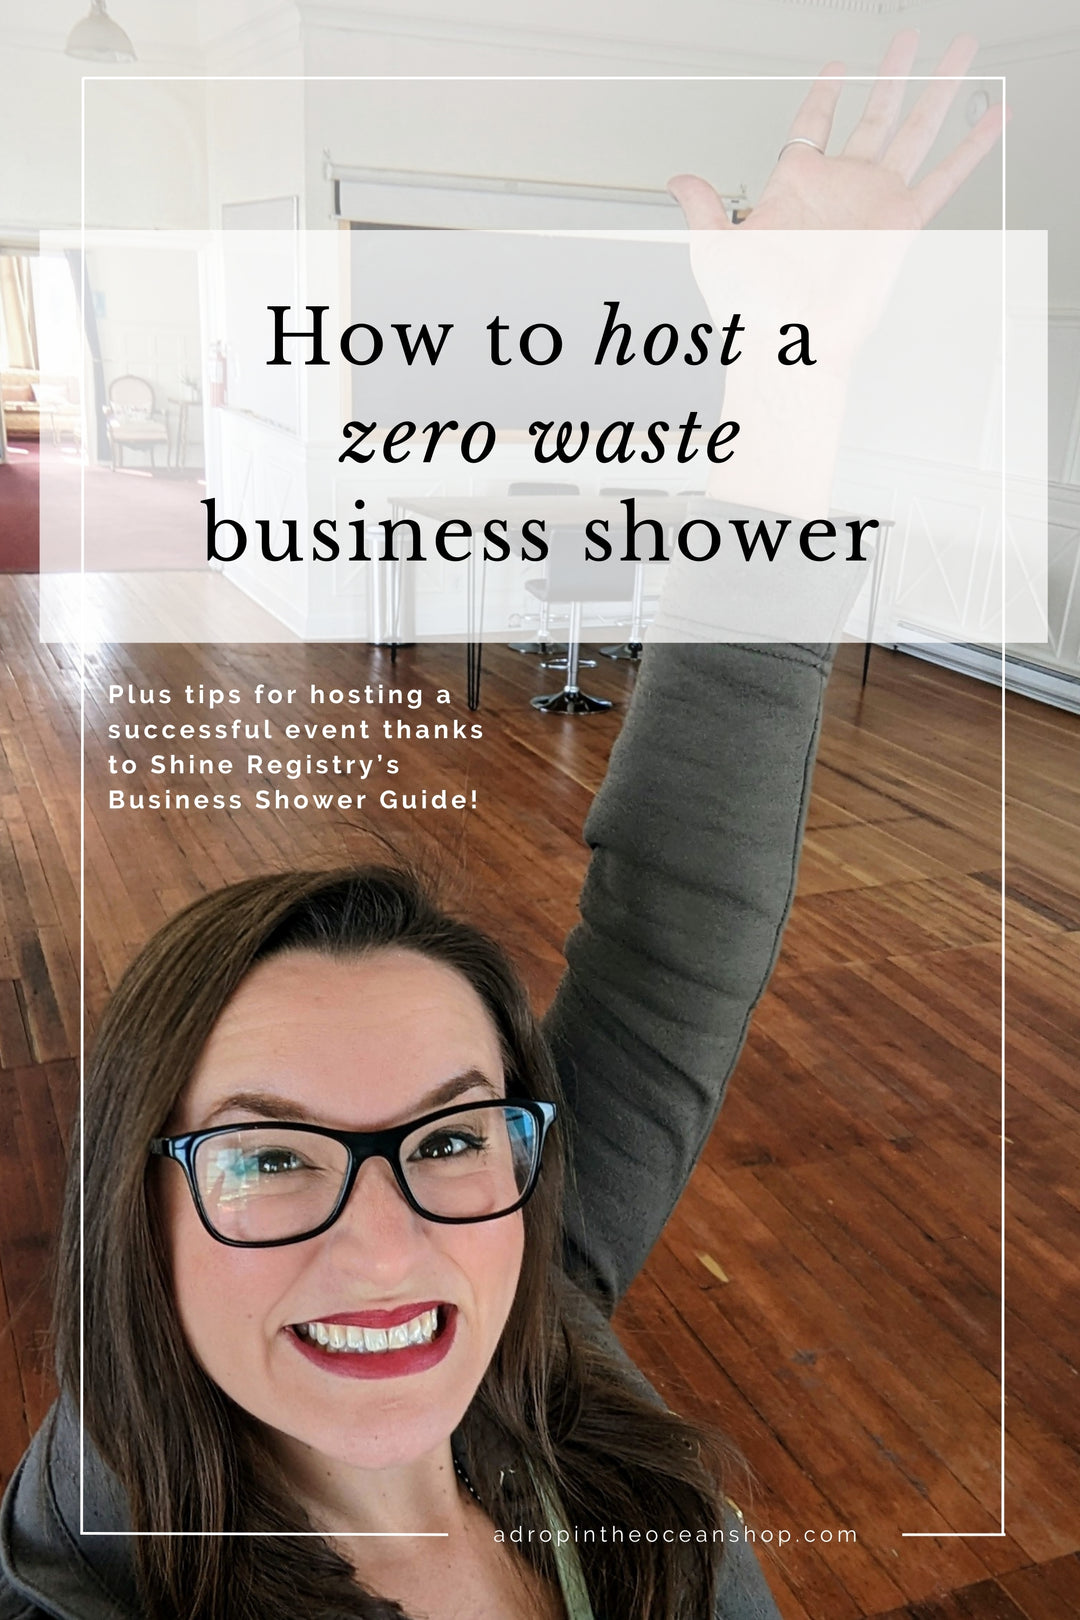 A Drop in the Ocean Shop: How to Host a Zero Waste Business Shower